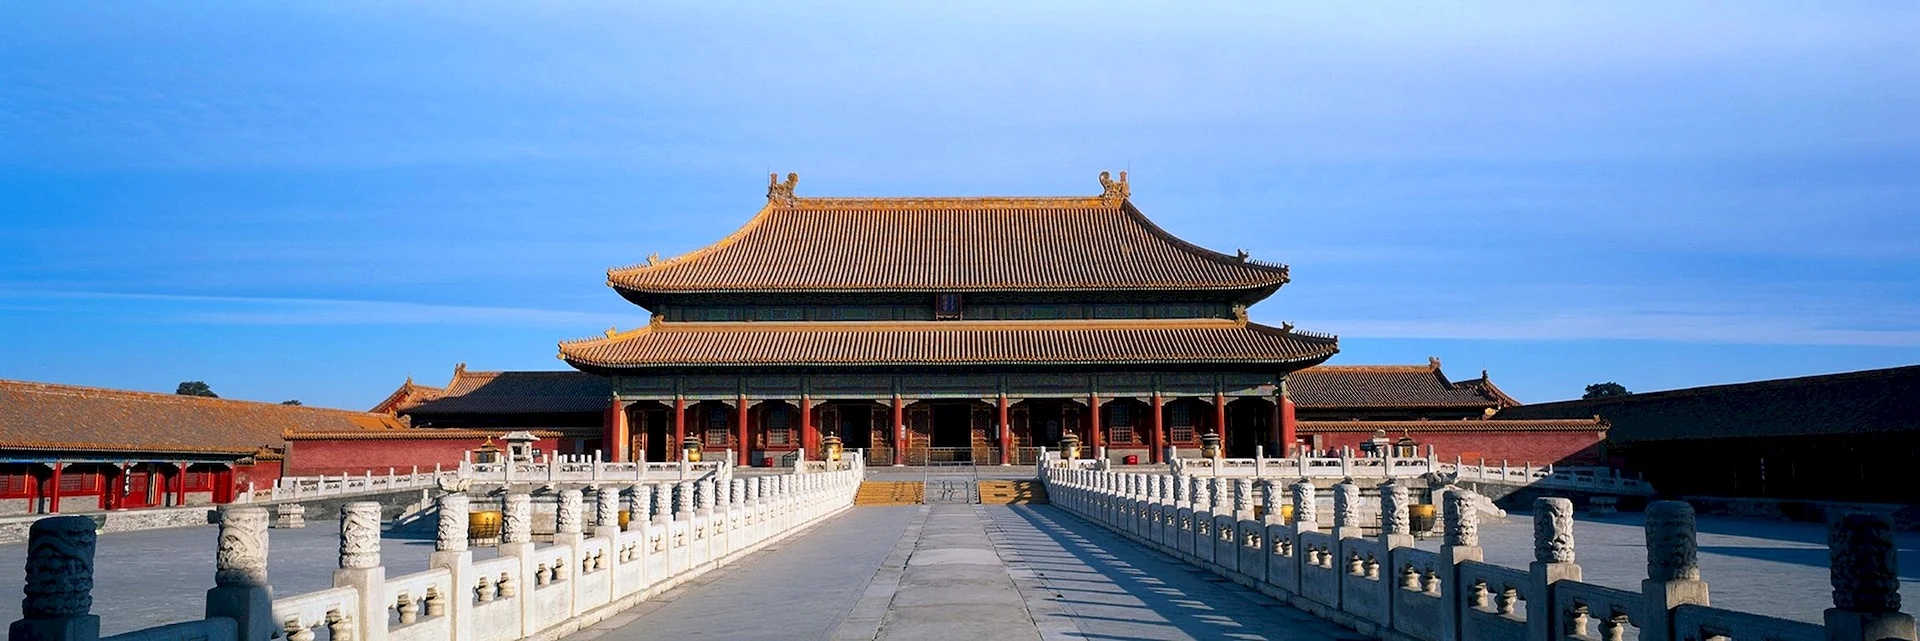 Imperial Palaces In Beijing Wallpaper